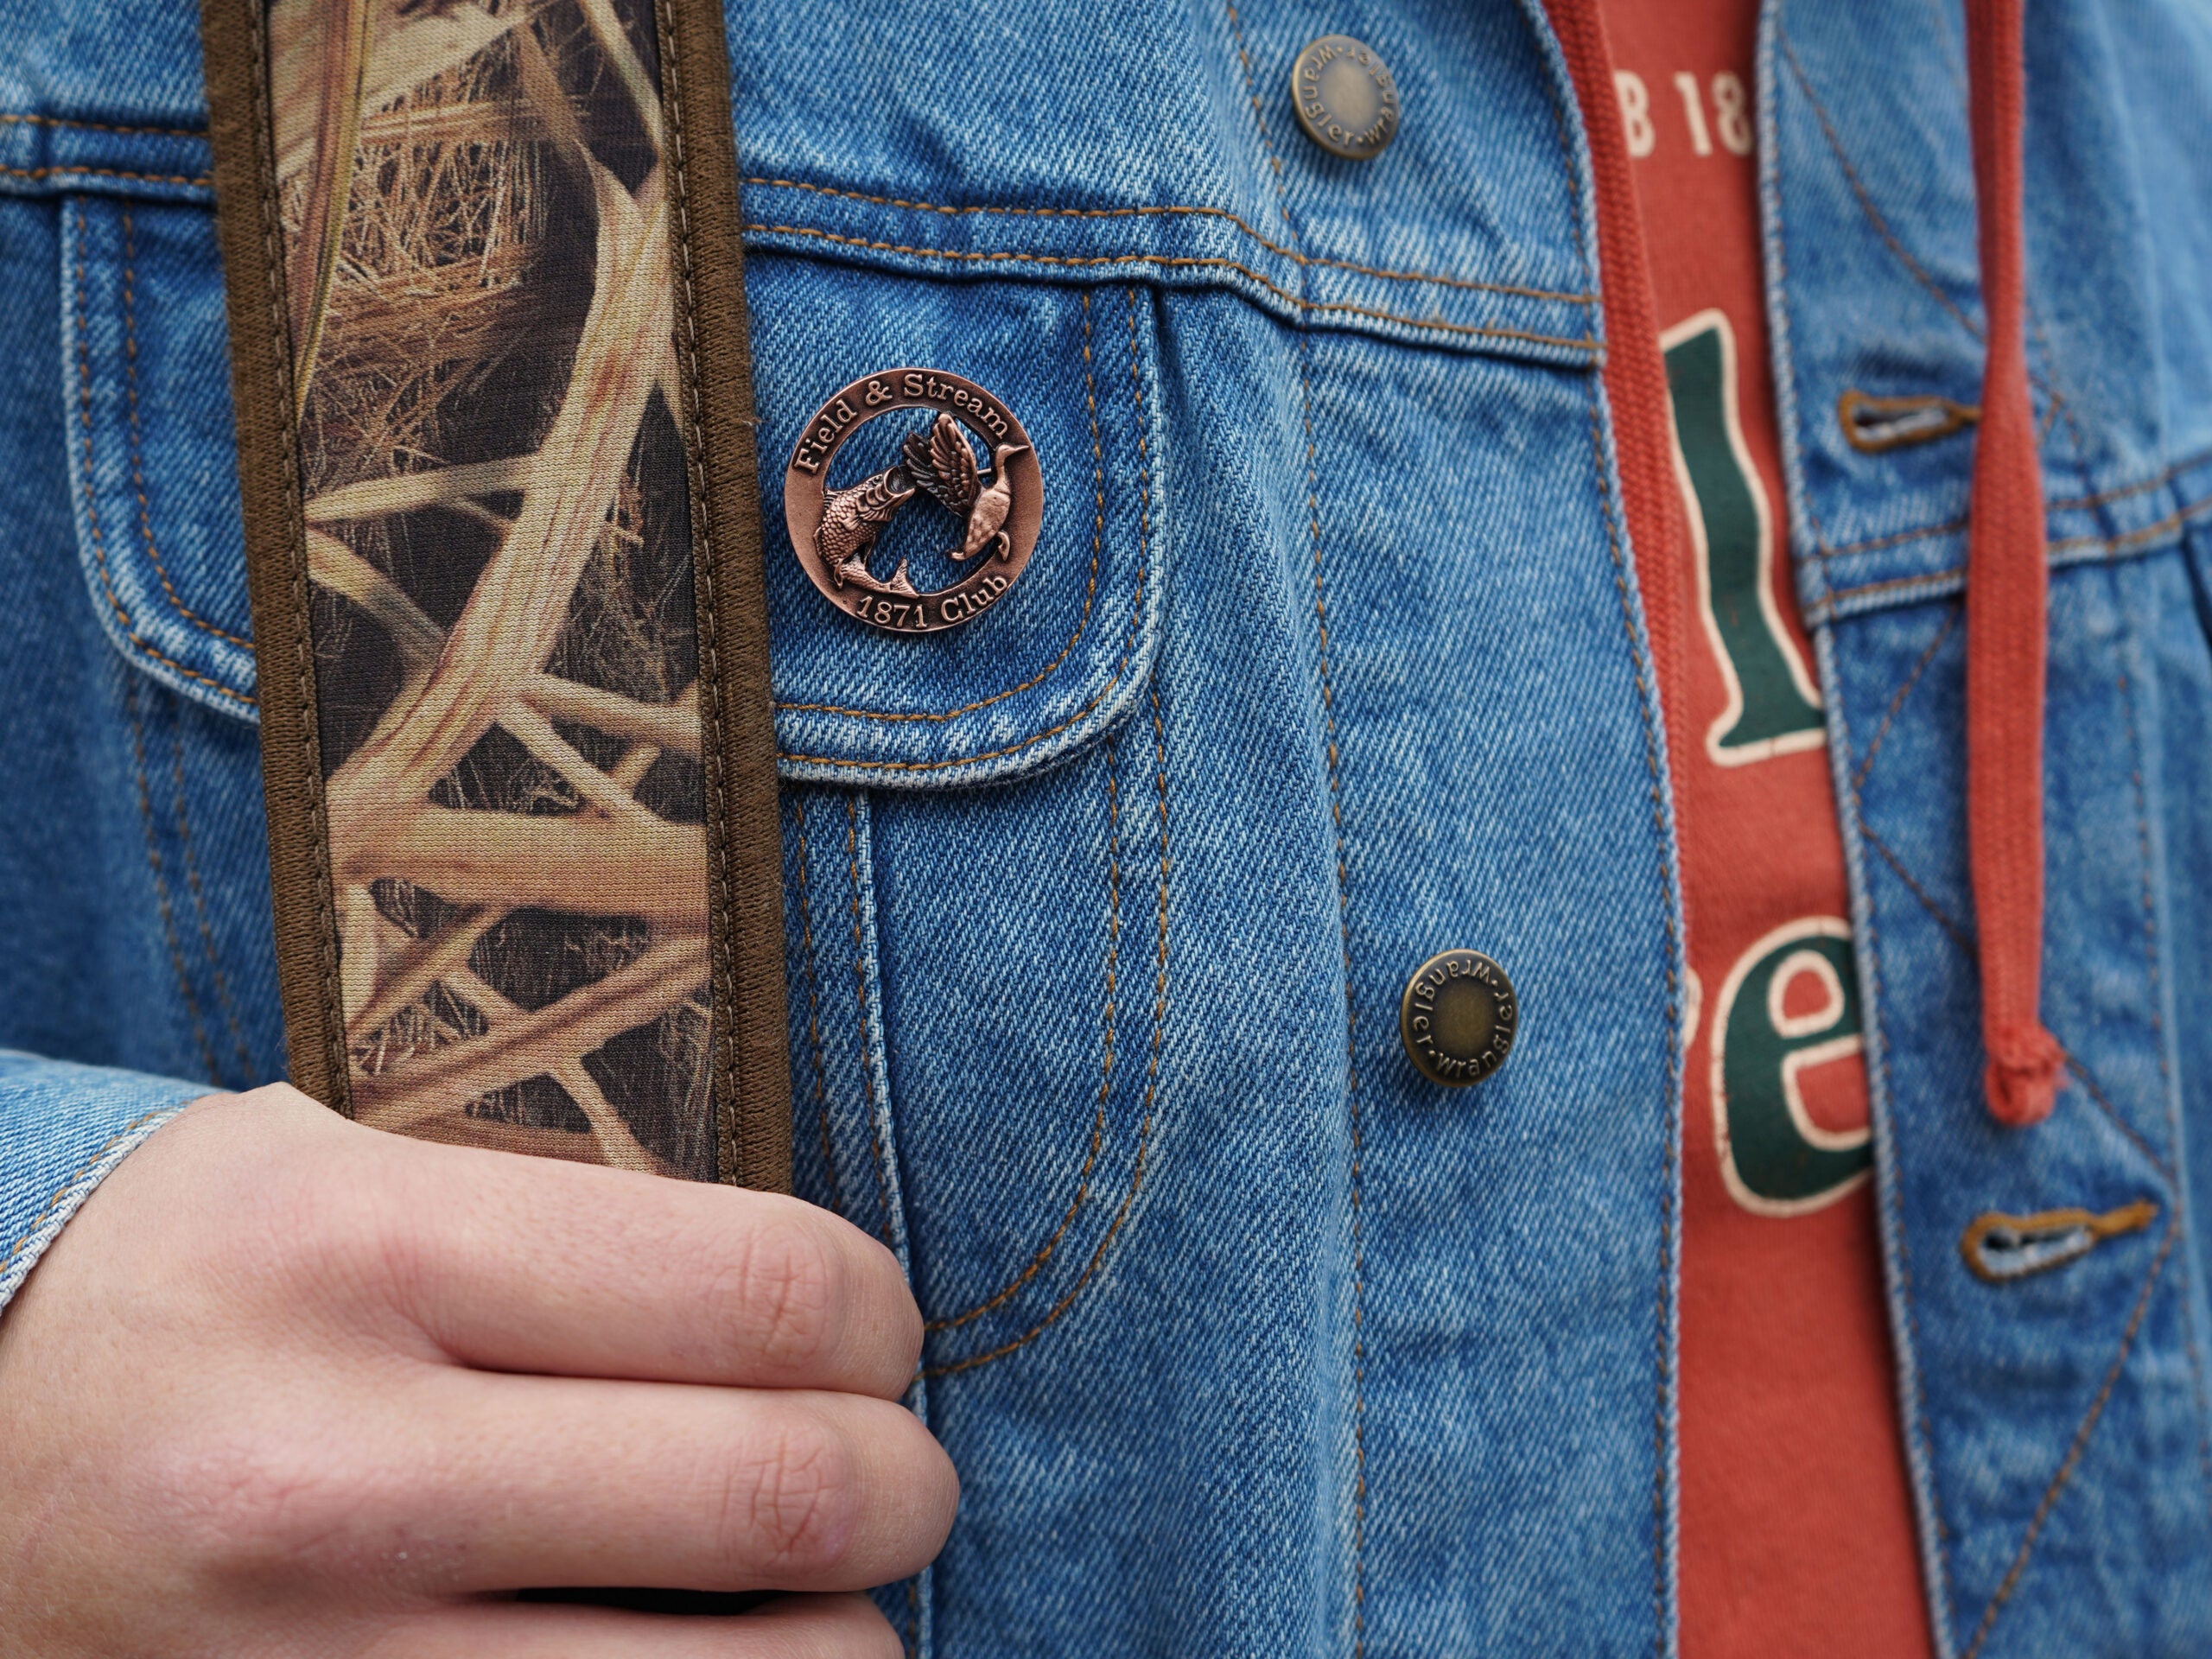 A Field & Stream honor badge pinned to a denim jacket